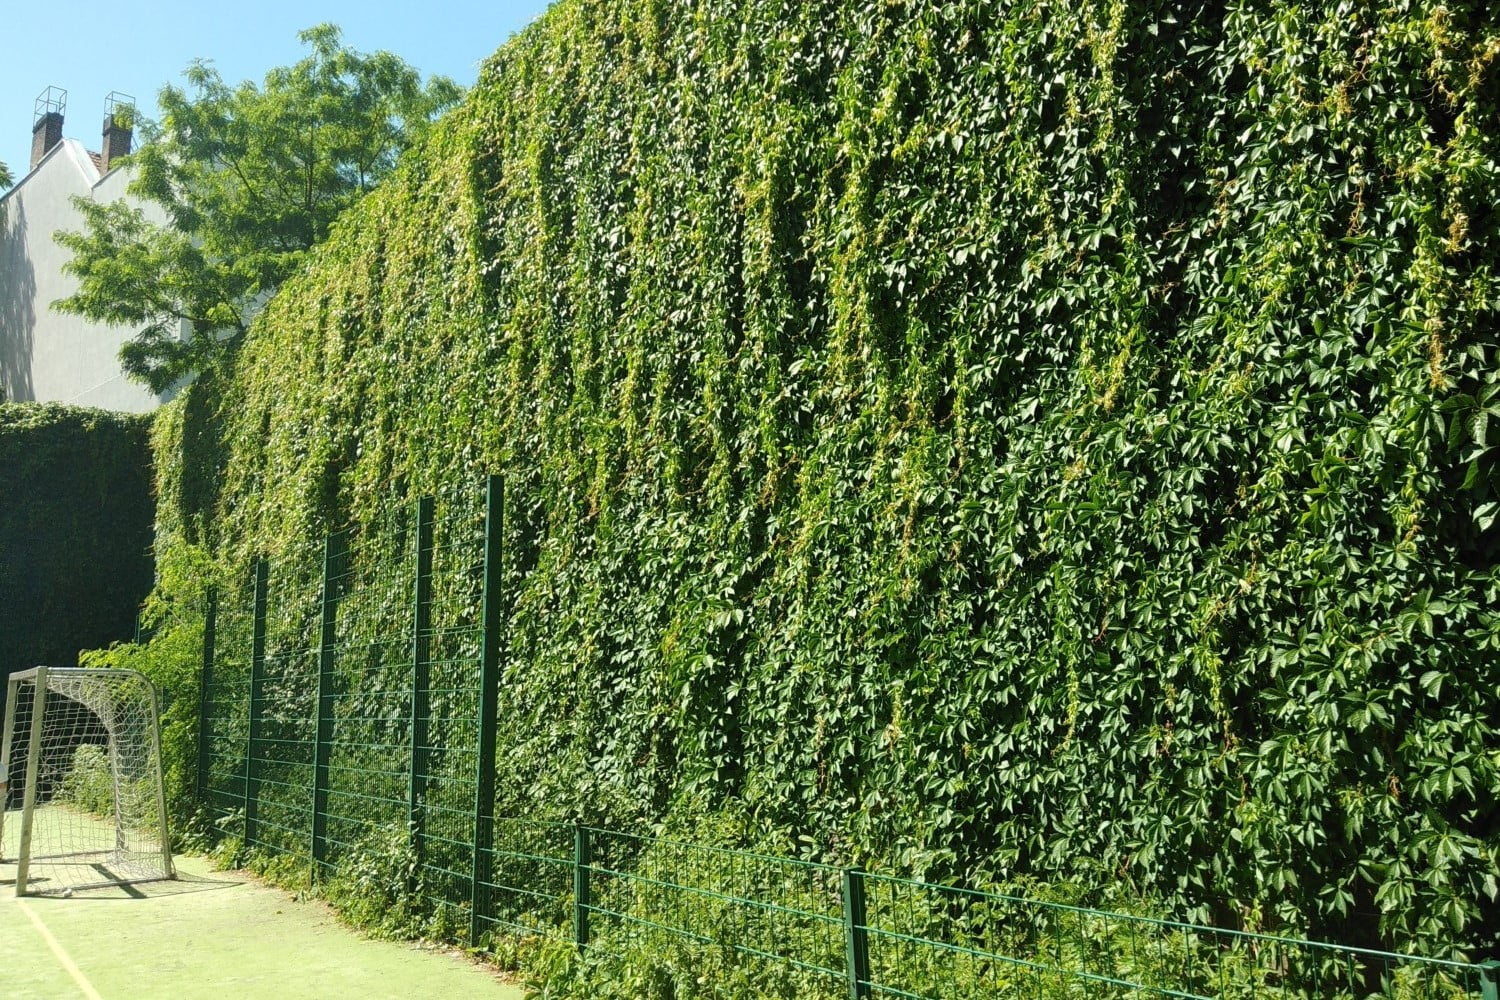 A 'living' wall covered in green vegetation at the edge of some climate ready school grounds.